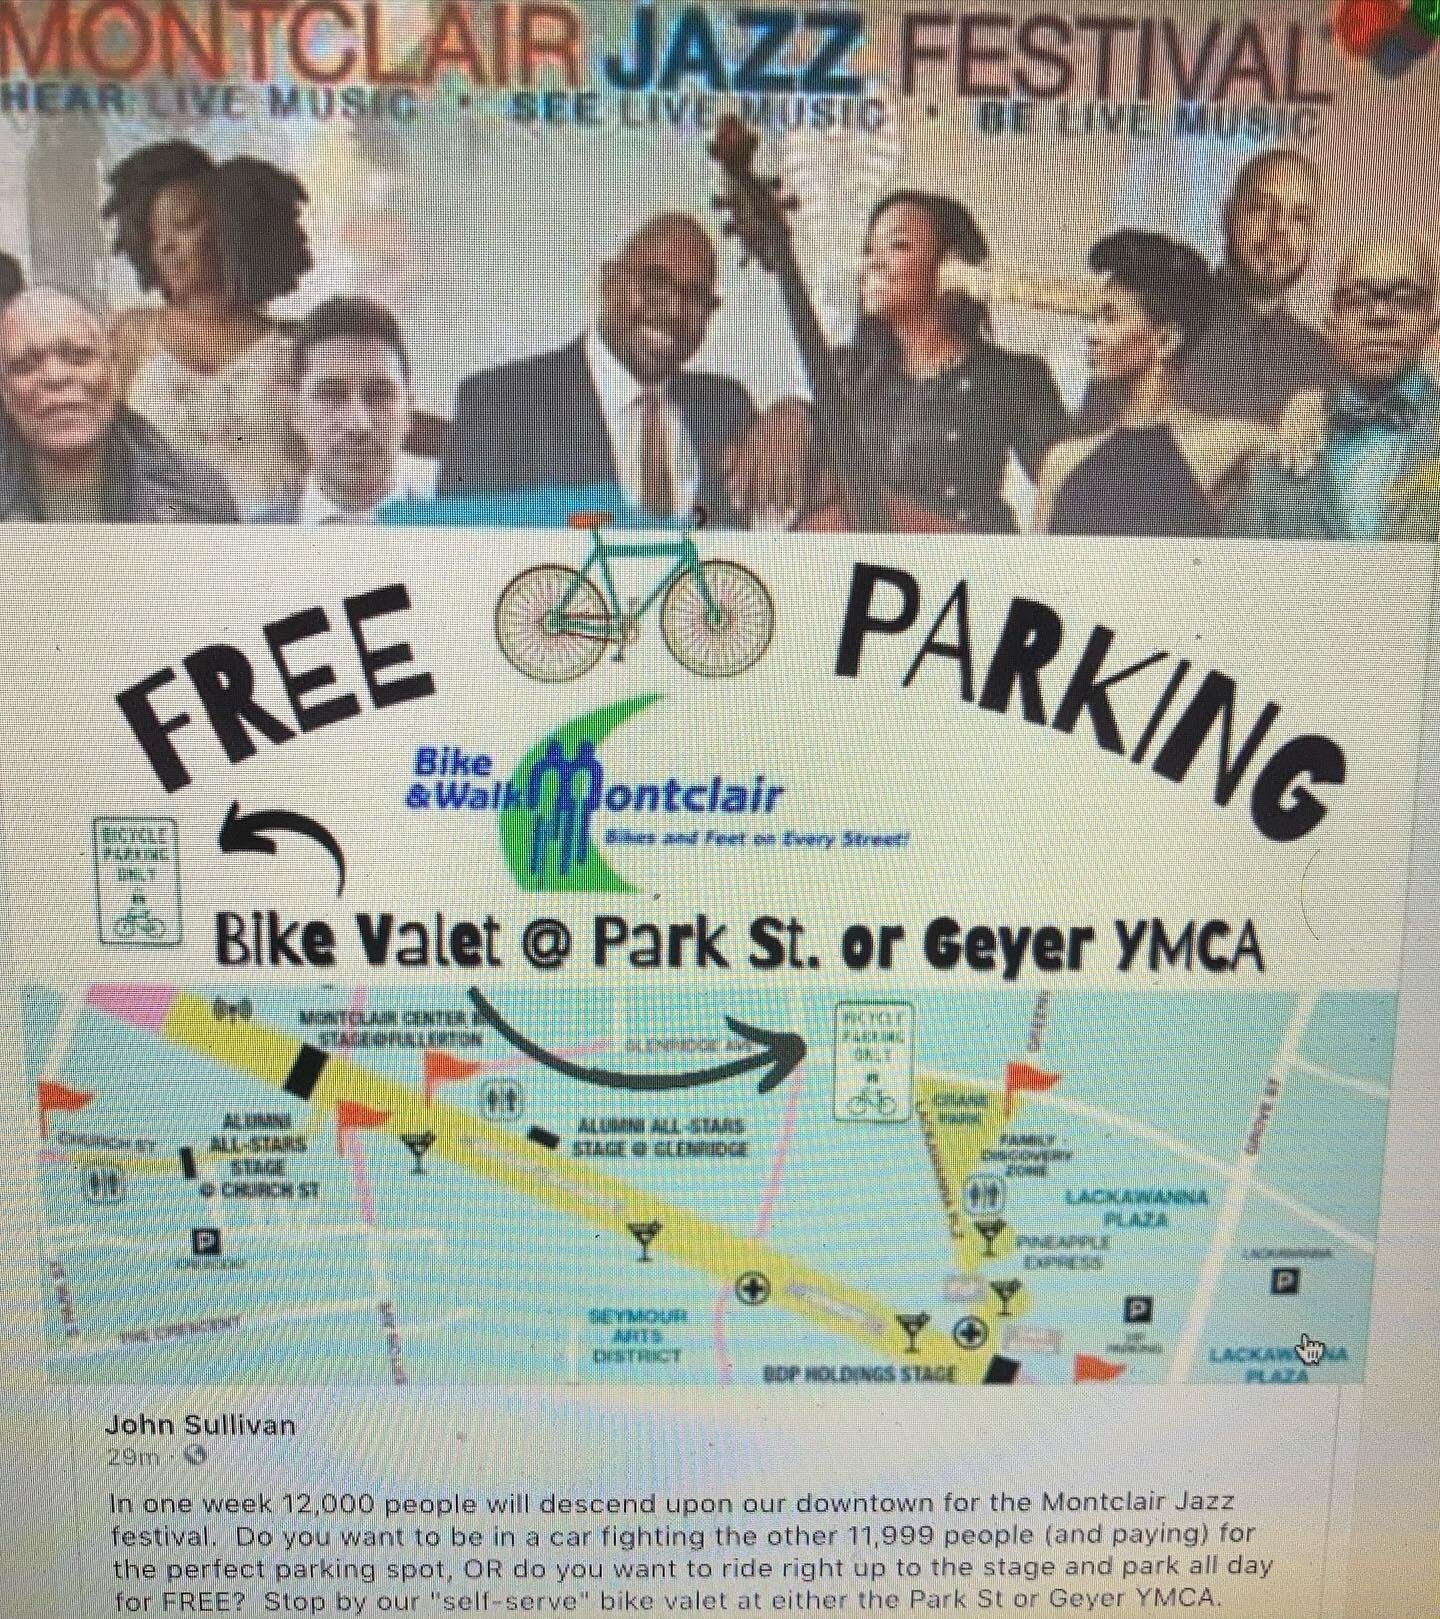 In One week 12,000 people will descend upon our downtown for the Montclair Jazz Fest! Would you rather be in a car fighting the other 11,999 people, and paying for a parking spot far from the action, or do you want to be able to ride right up to the 